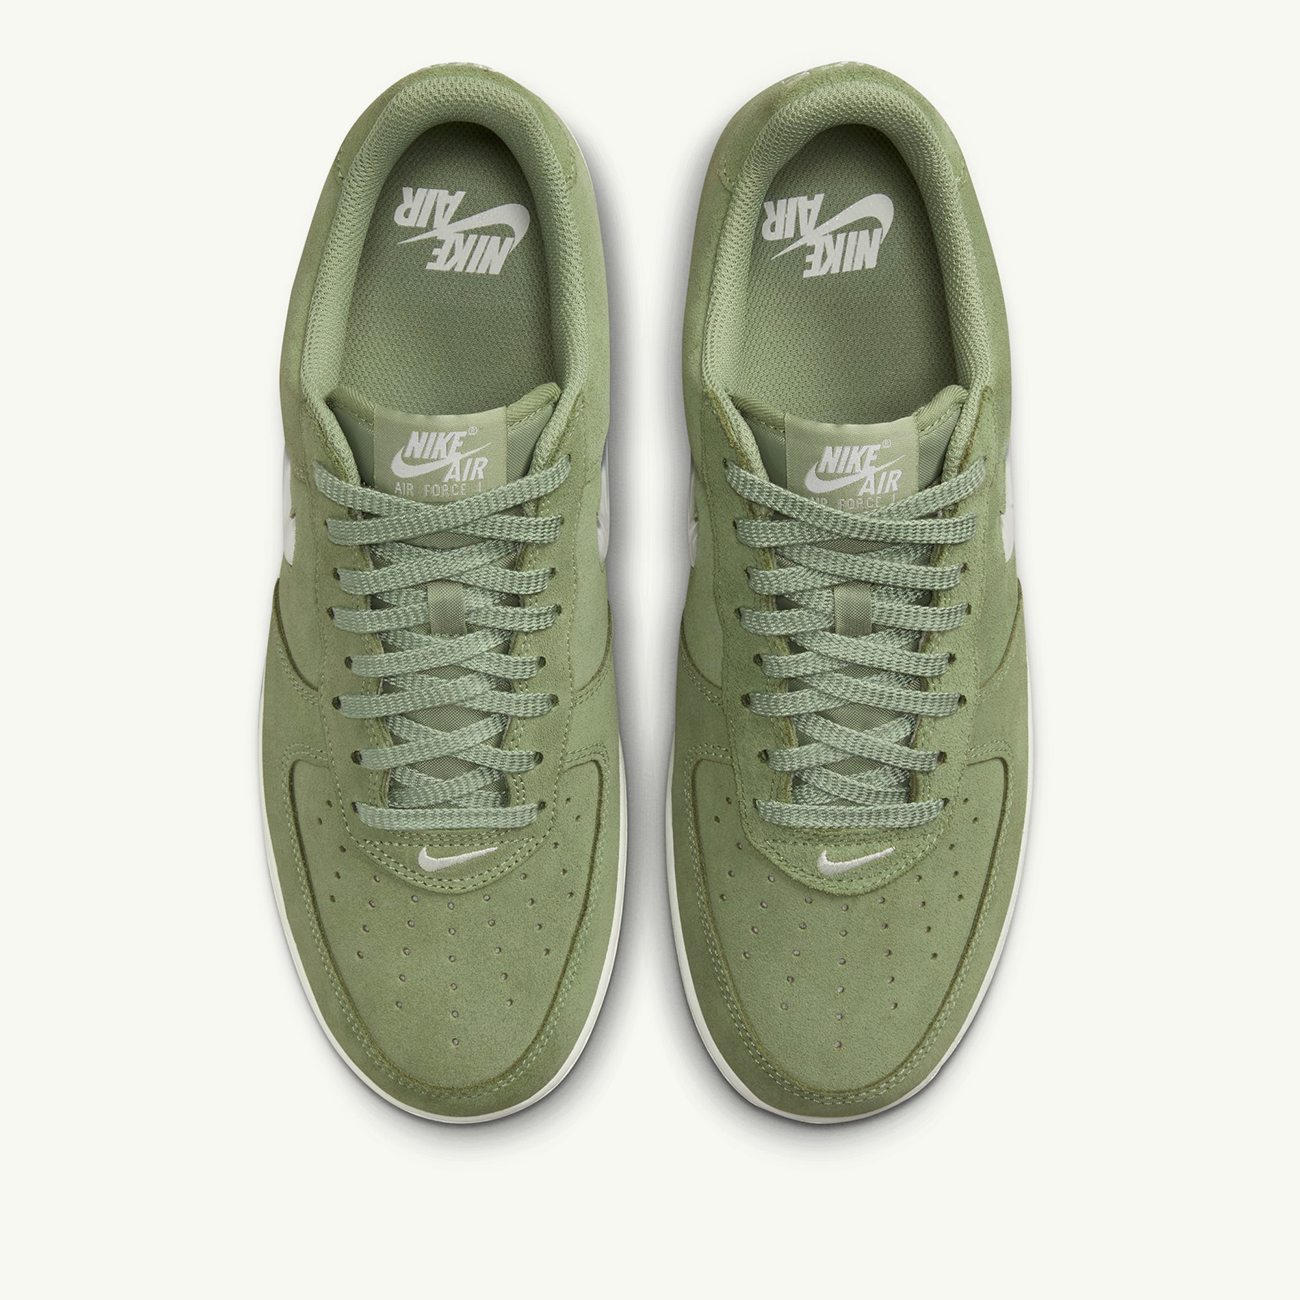 Air Force 1 Low Retro - Oil Green/Summit White